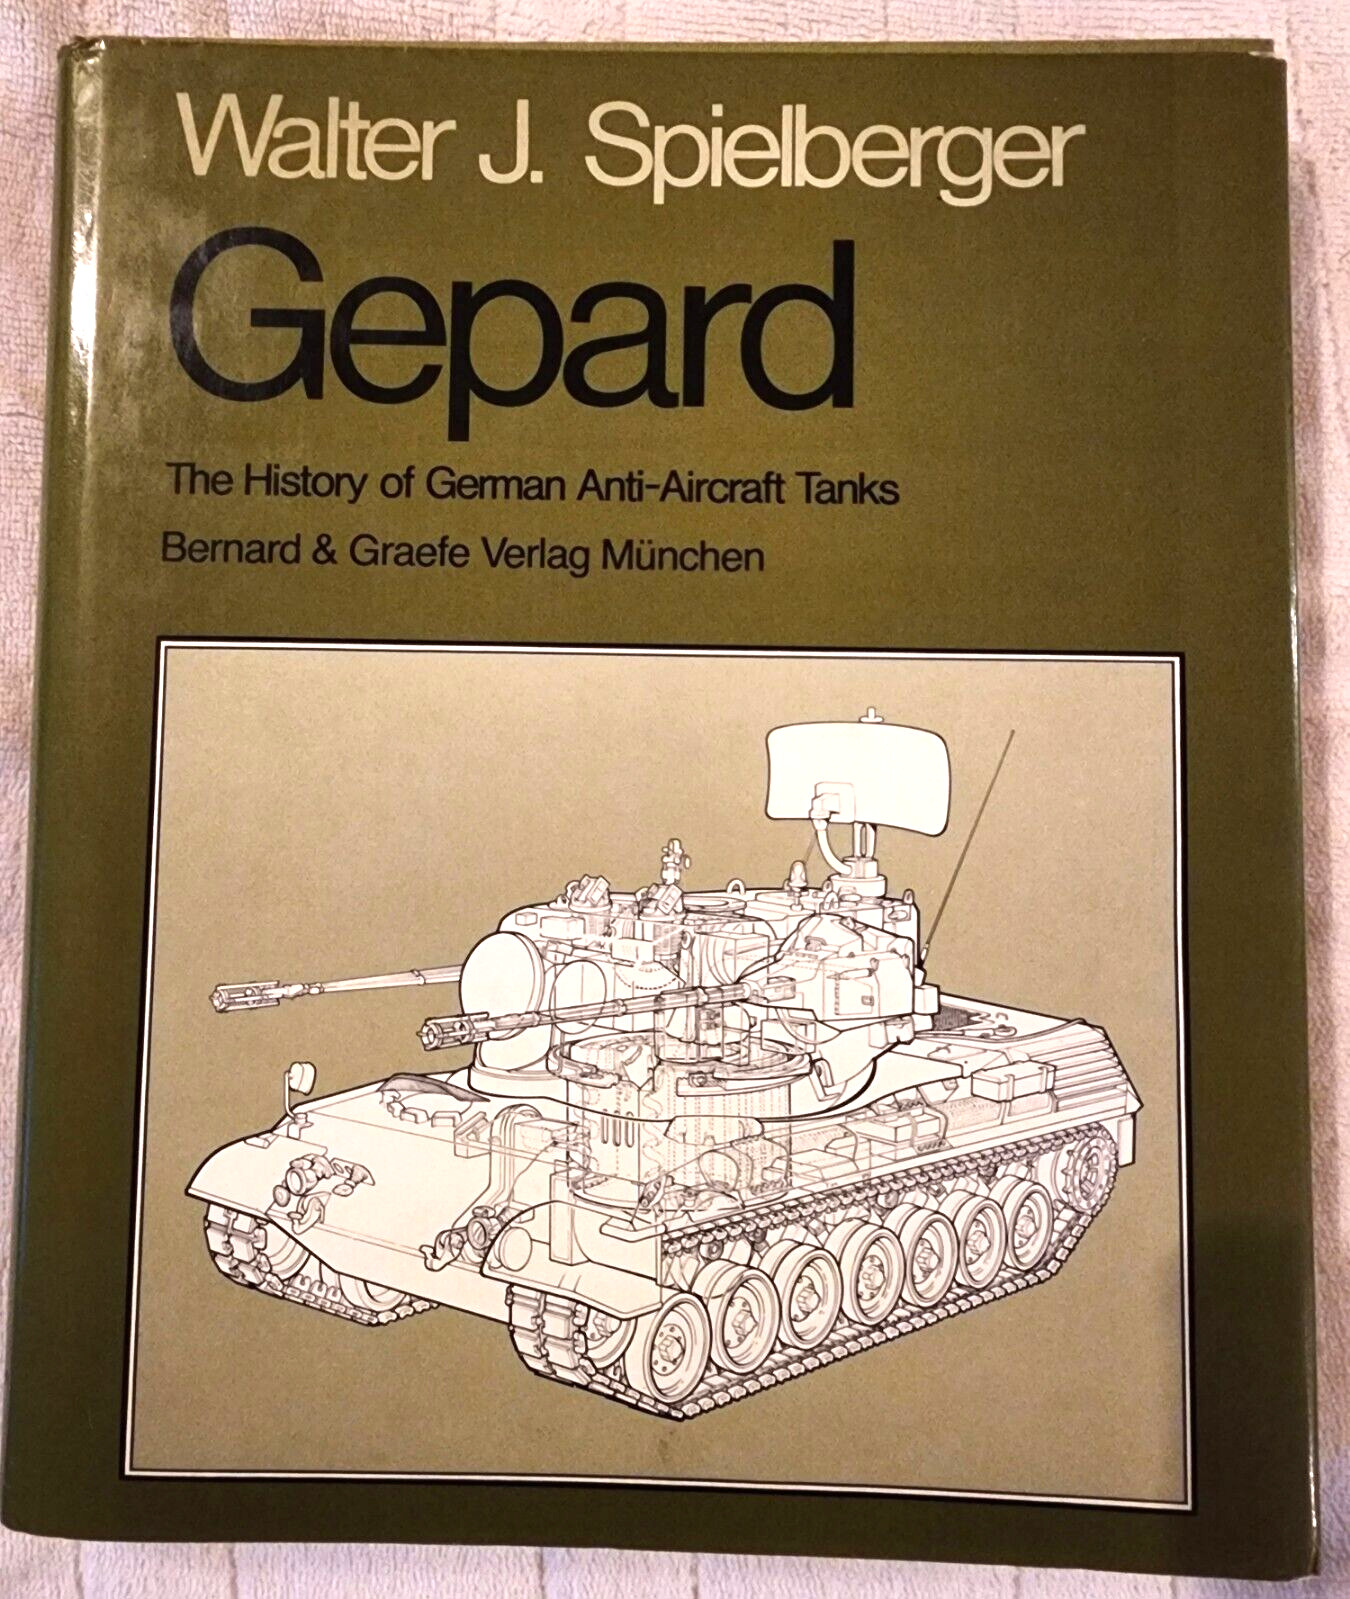 Walter J. Spielberger Gepard The History of German Anti-Aircraft Tanks Hardcover